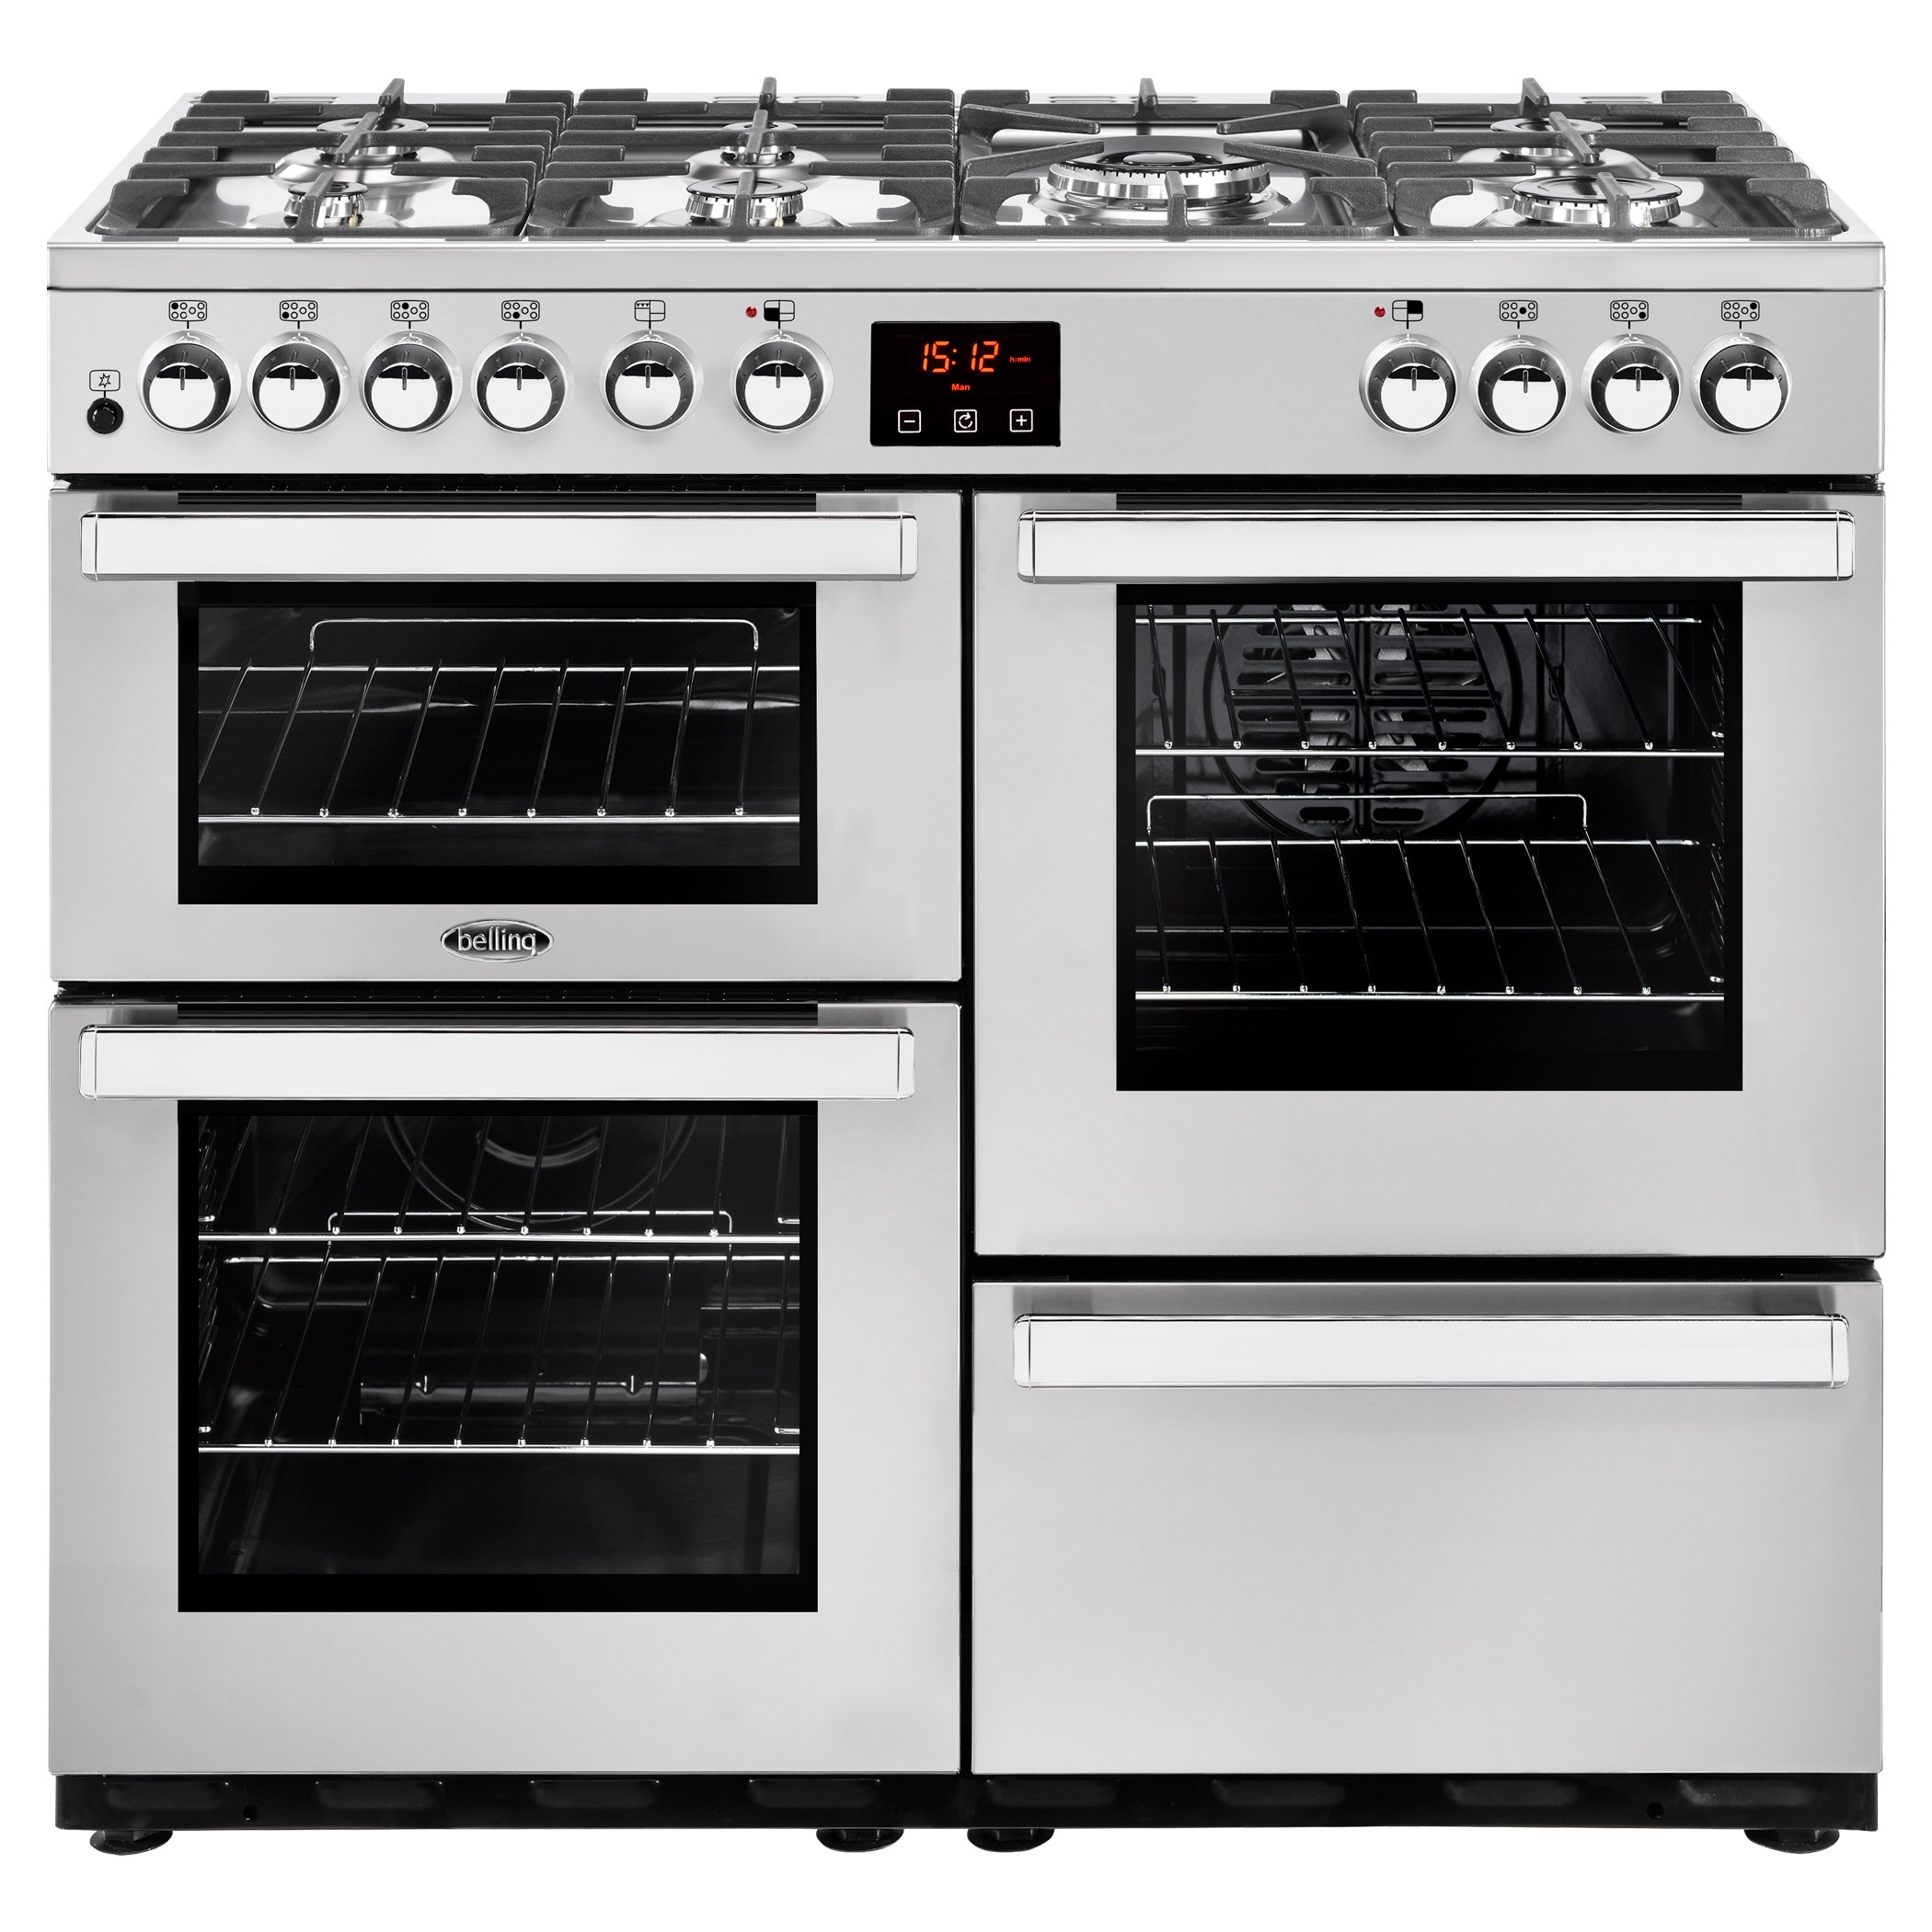 100cm dual fuel range cooker with 7 burner gas hob, 4kW PowerWok, Cast Iron Pansure Supports, Maxi-Clock and easy clean enamel.